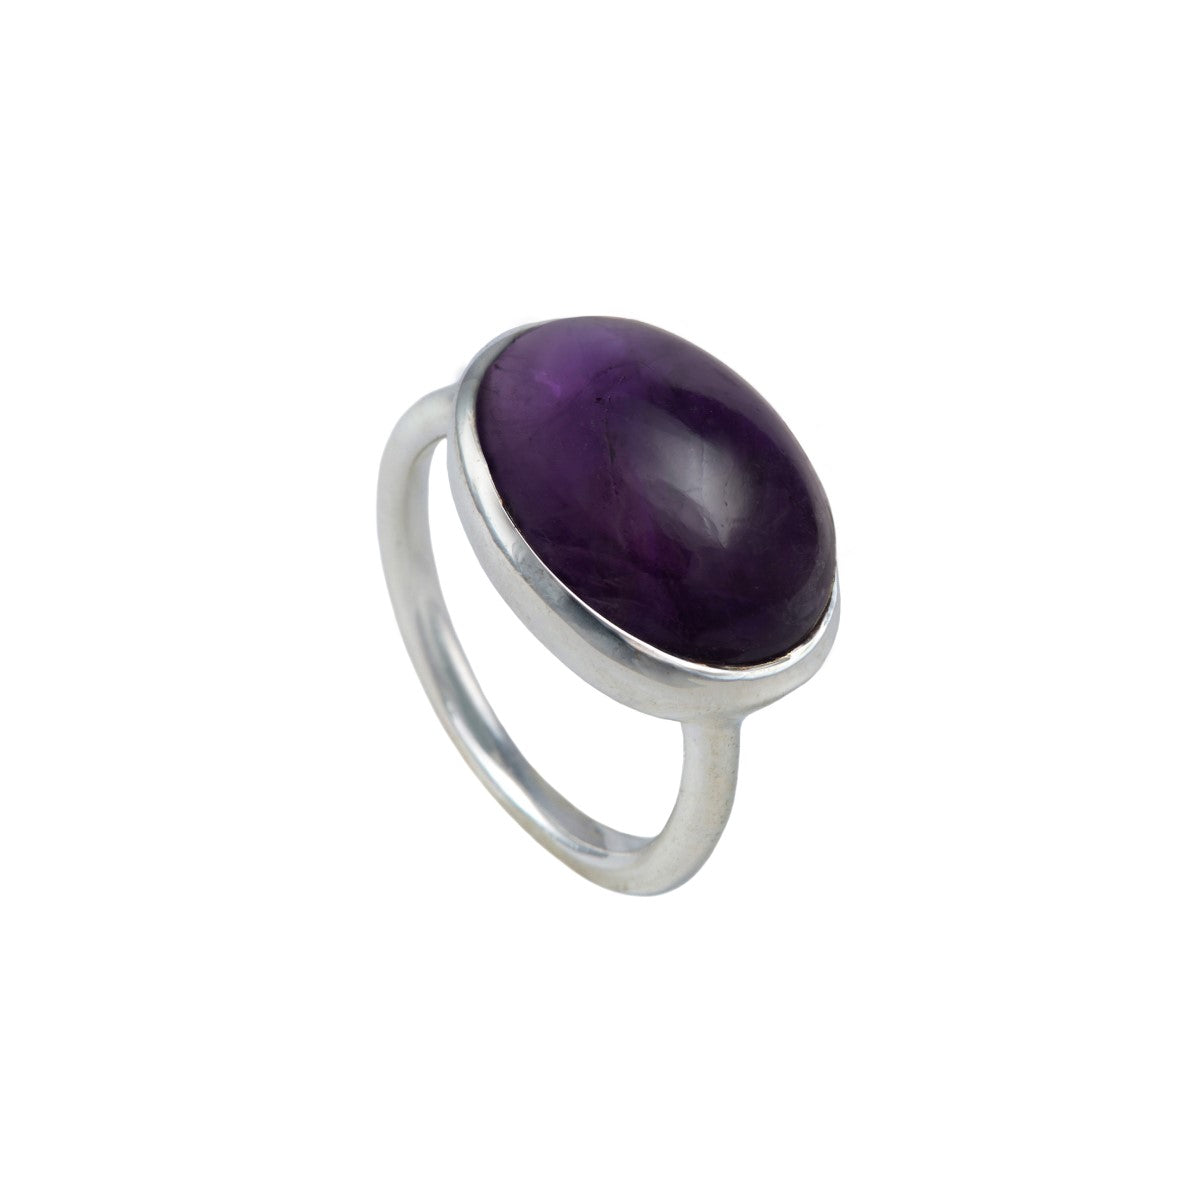 Cabochon Oval Cut Natural Gemstone Sterling Silver Ring - Amethyst